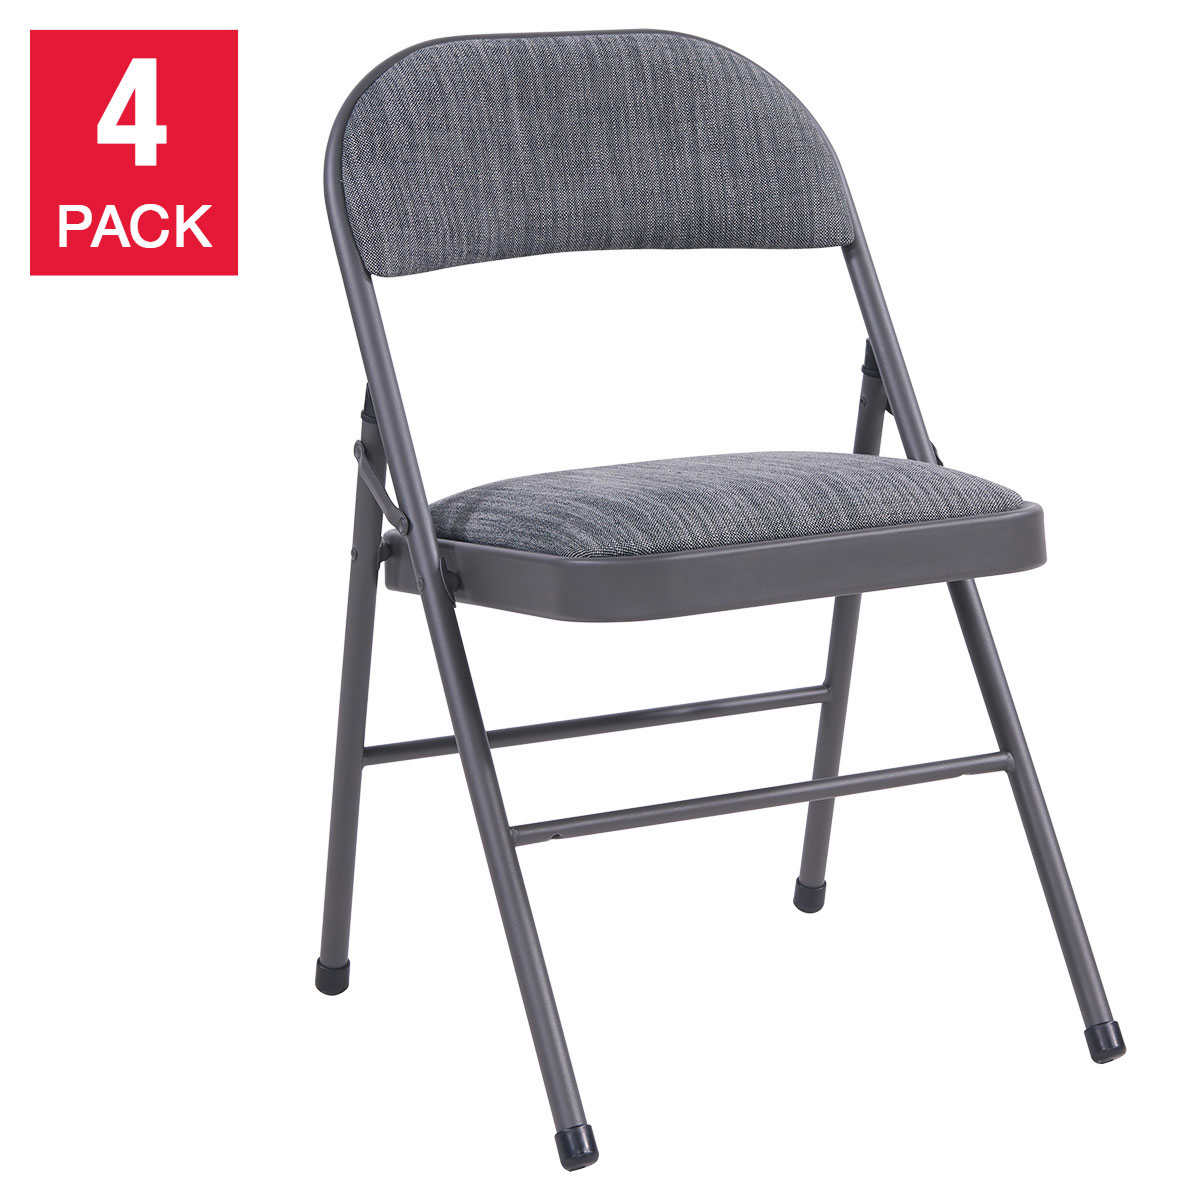 maxchief upholstered padded folding chair 4pack